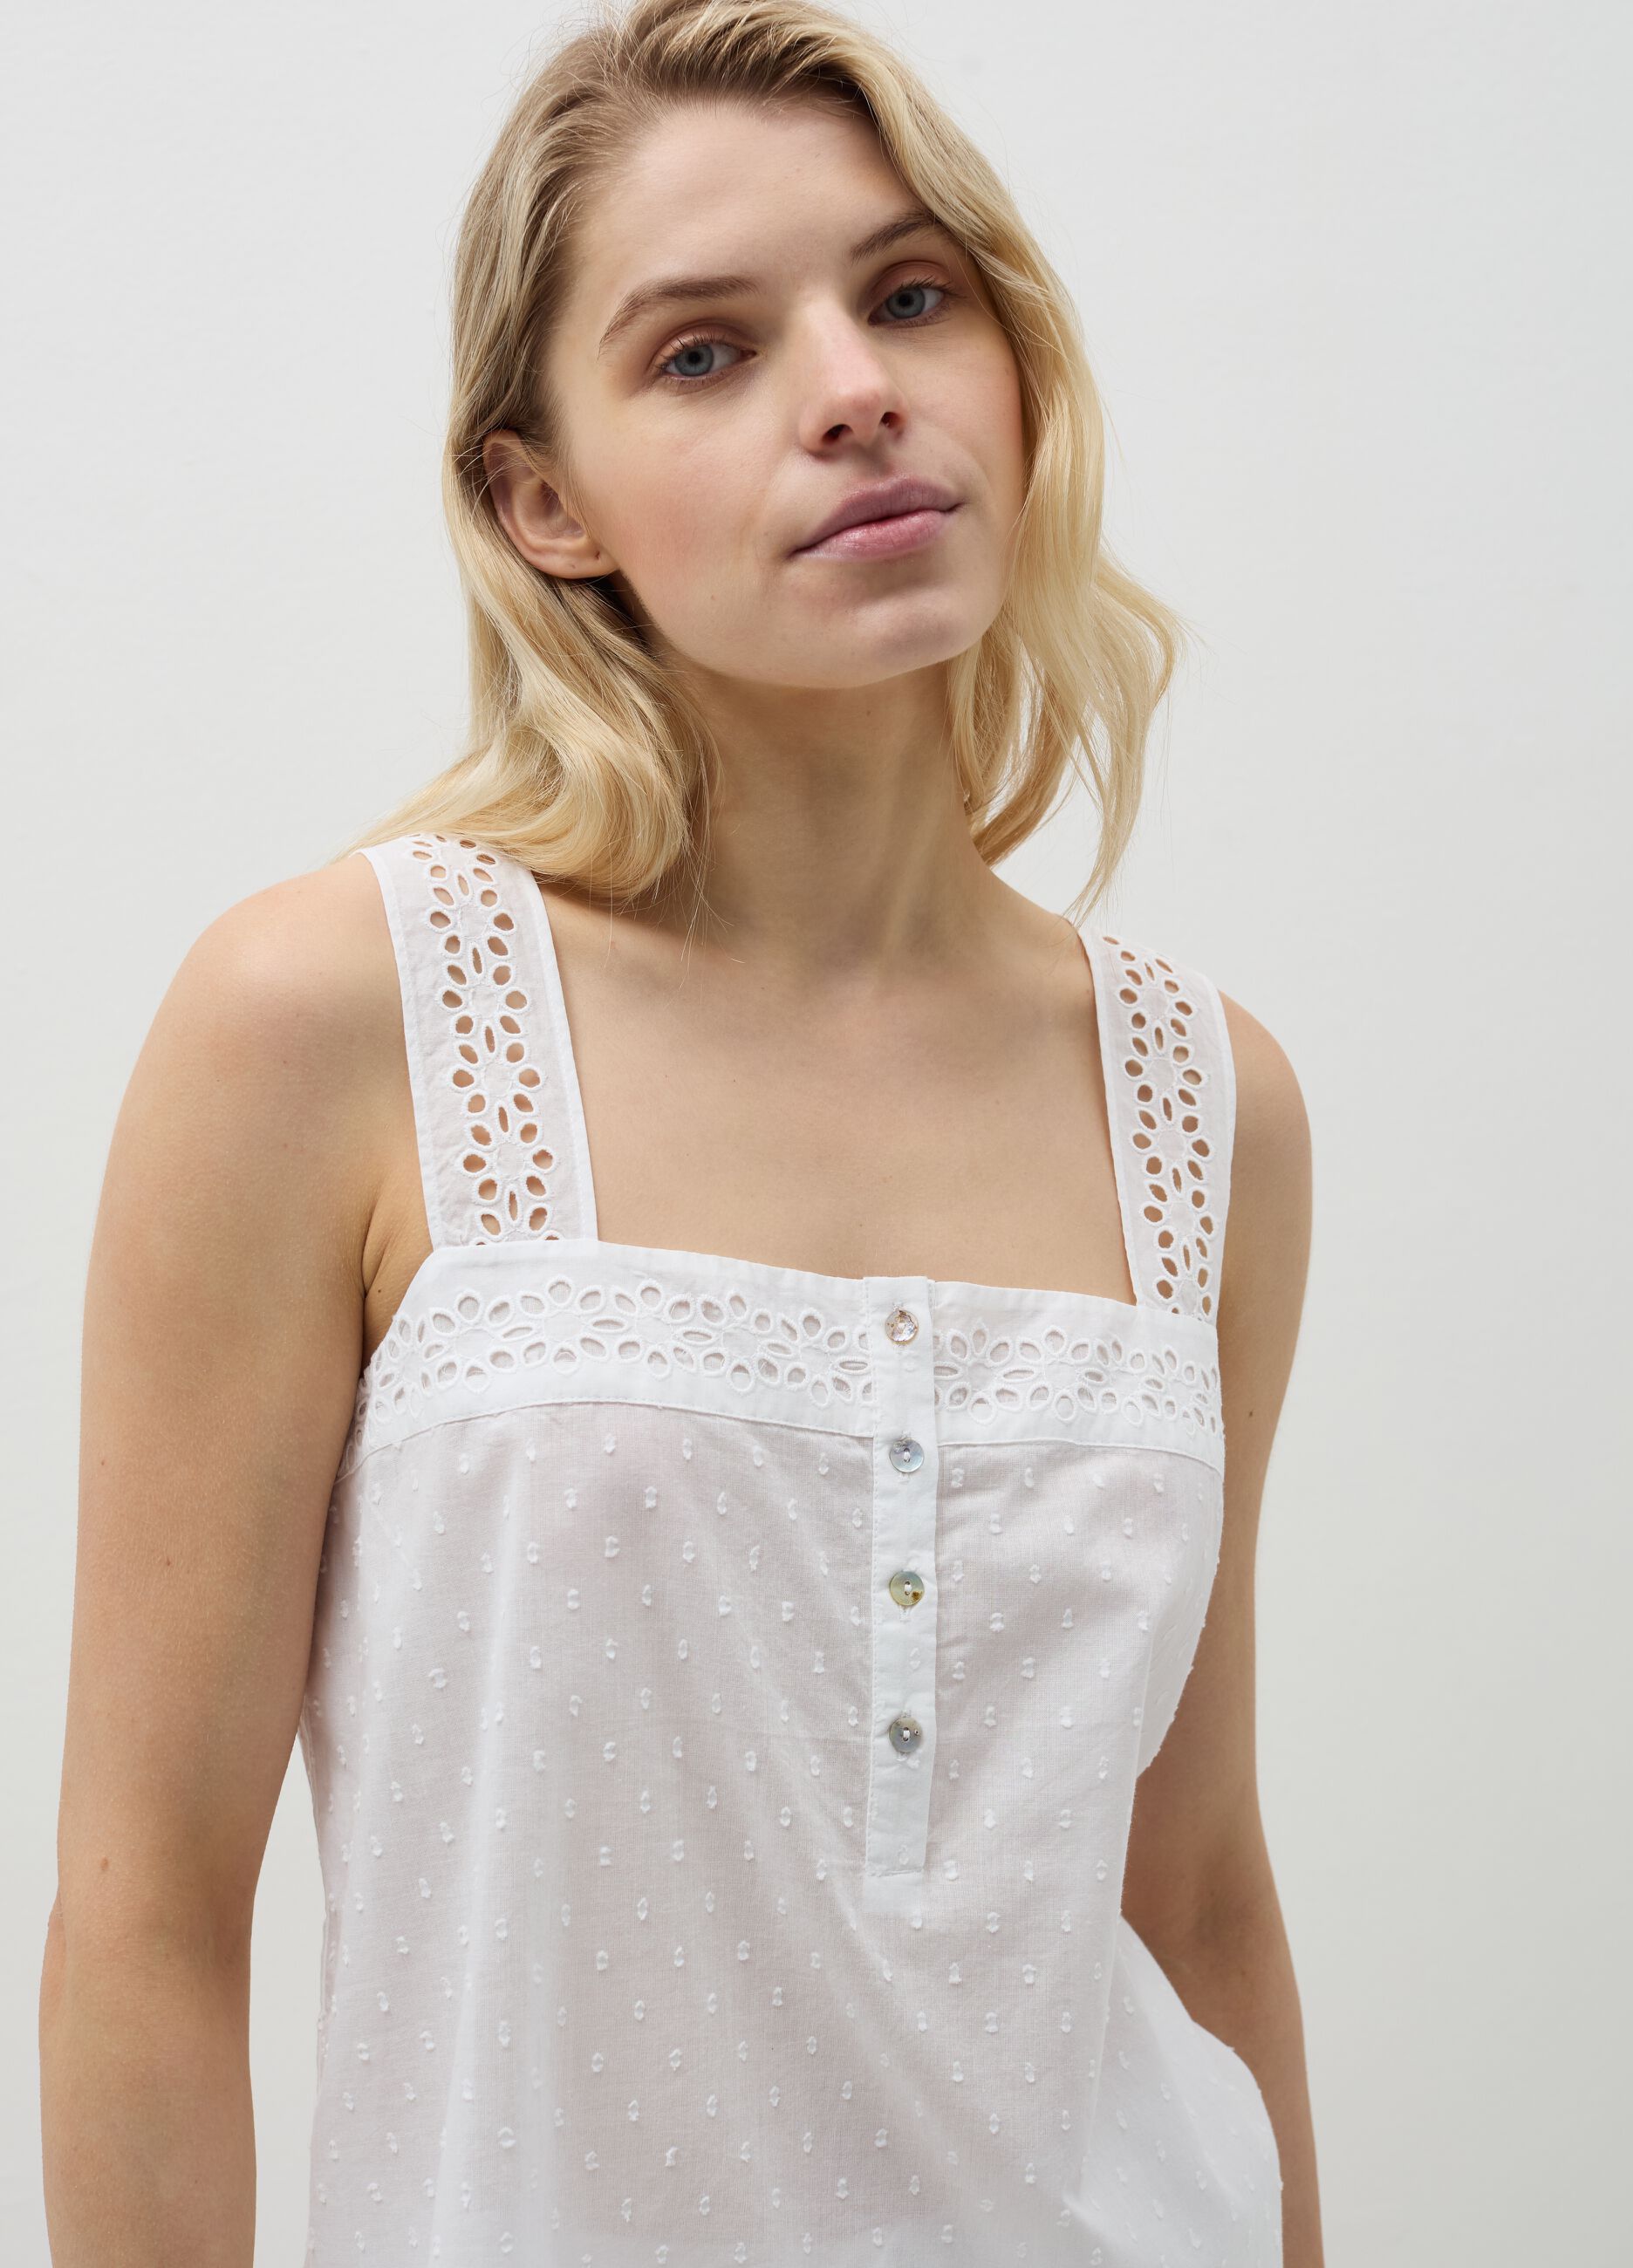 Pyjama top in cotton dobby with broderie anglaise